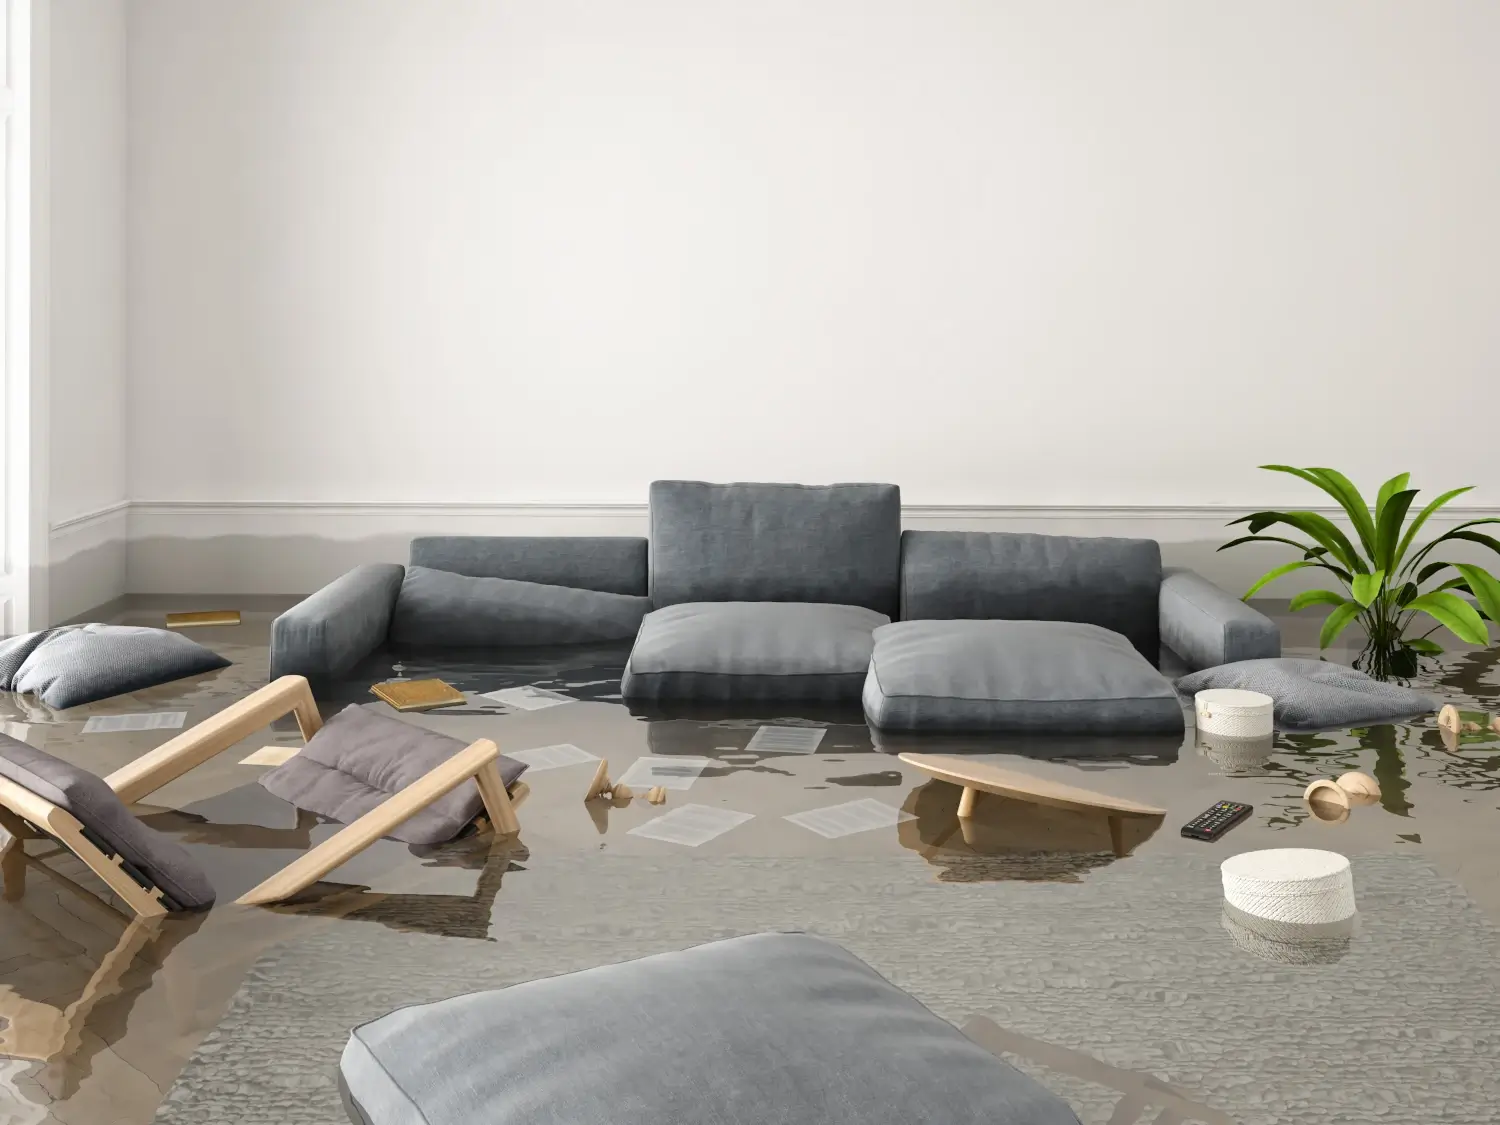 Benefits of professional flood damage repair services image